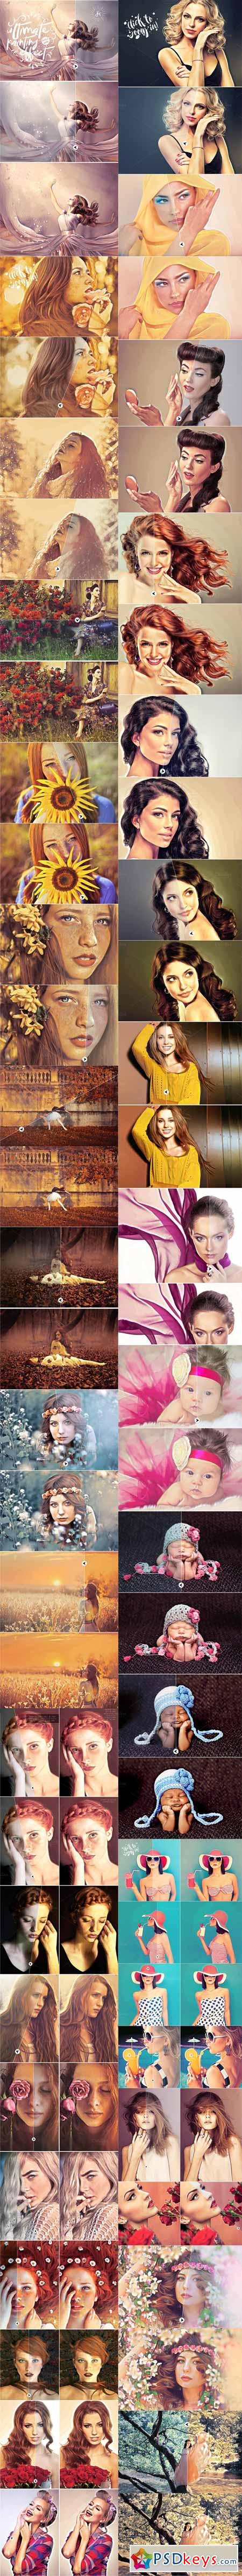 Ultimate Painting Effect Actions 337108